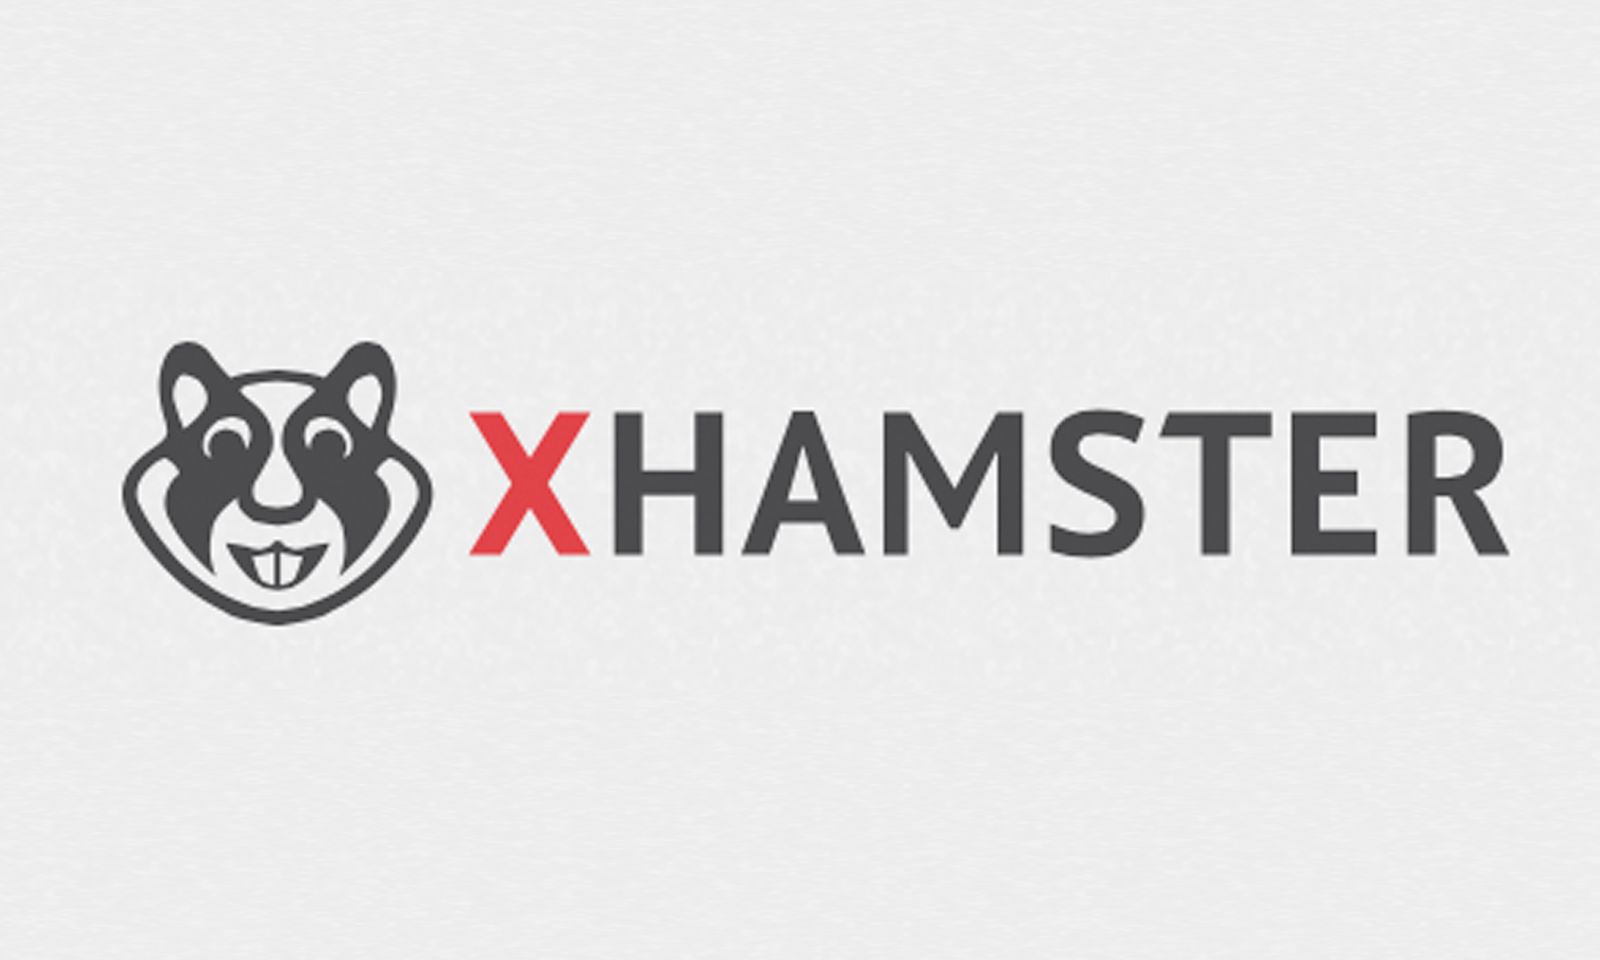 xHamster Debuts #UsToo Campaign To Fight Sexual Assault in Adult